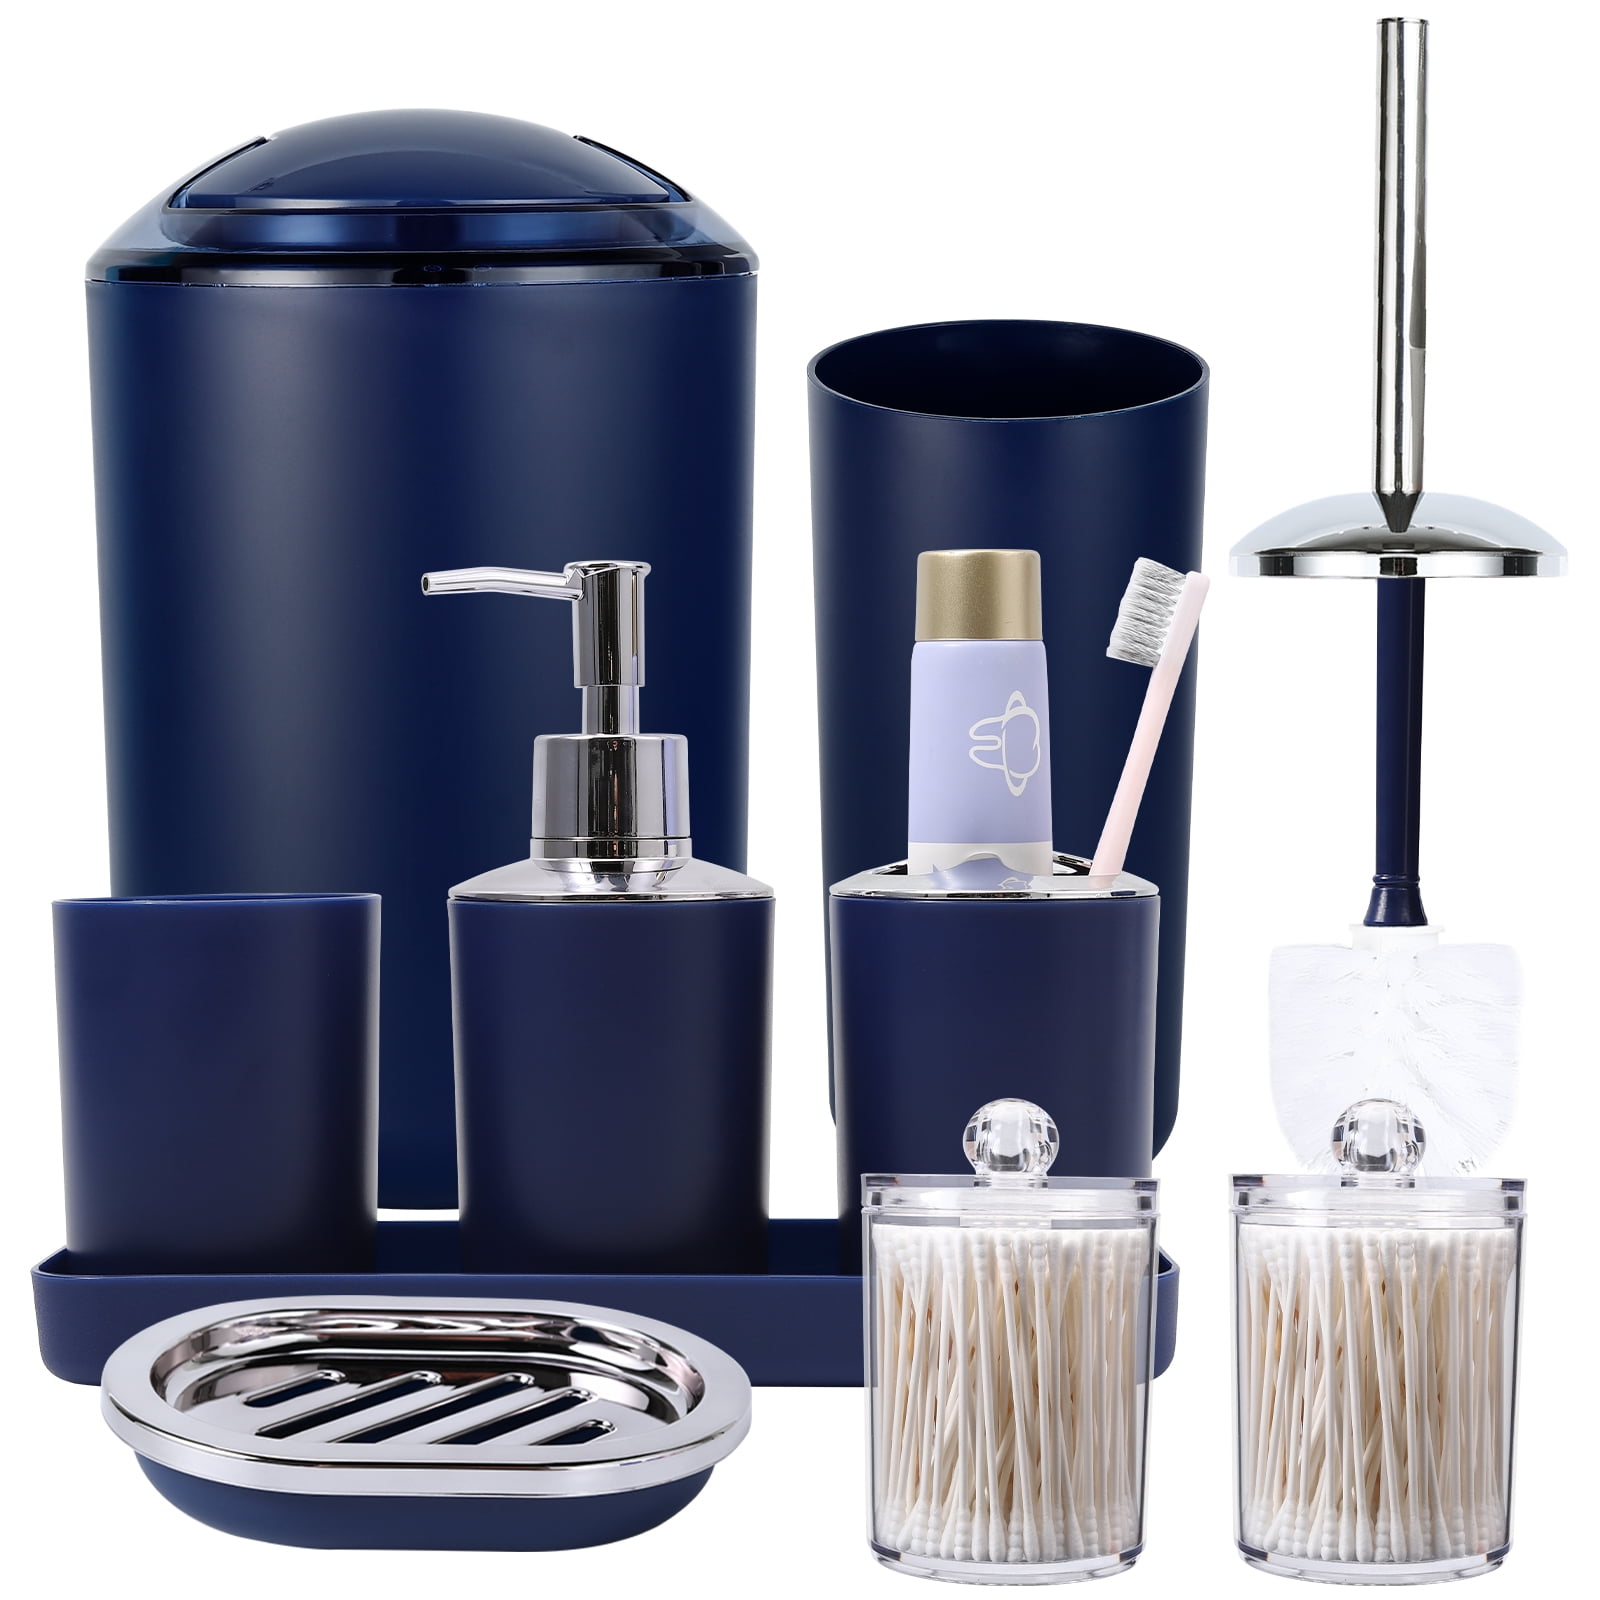 iMucci Navy Blue Bathroom Accessories Set of 8, with Toothbrush